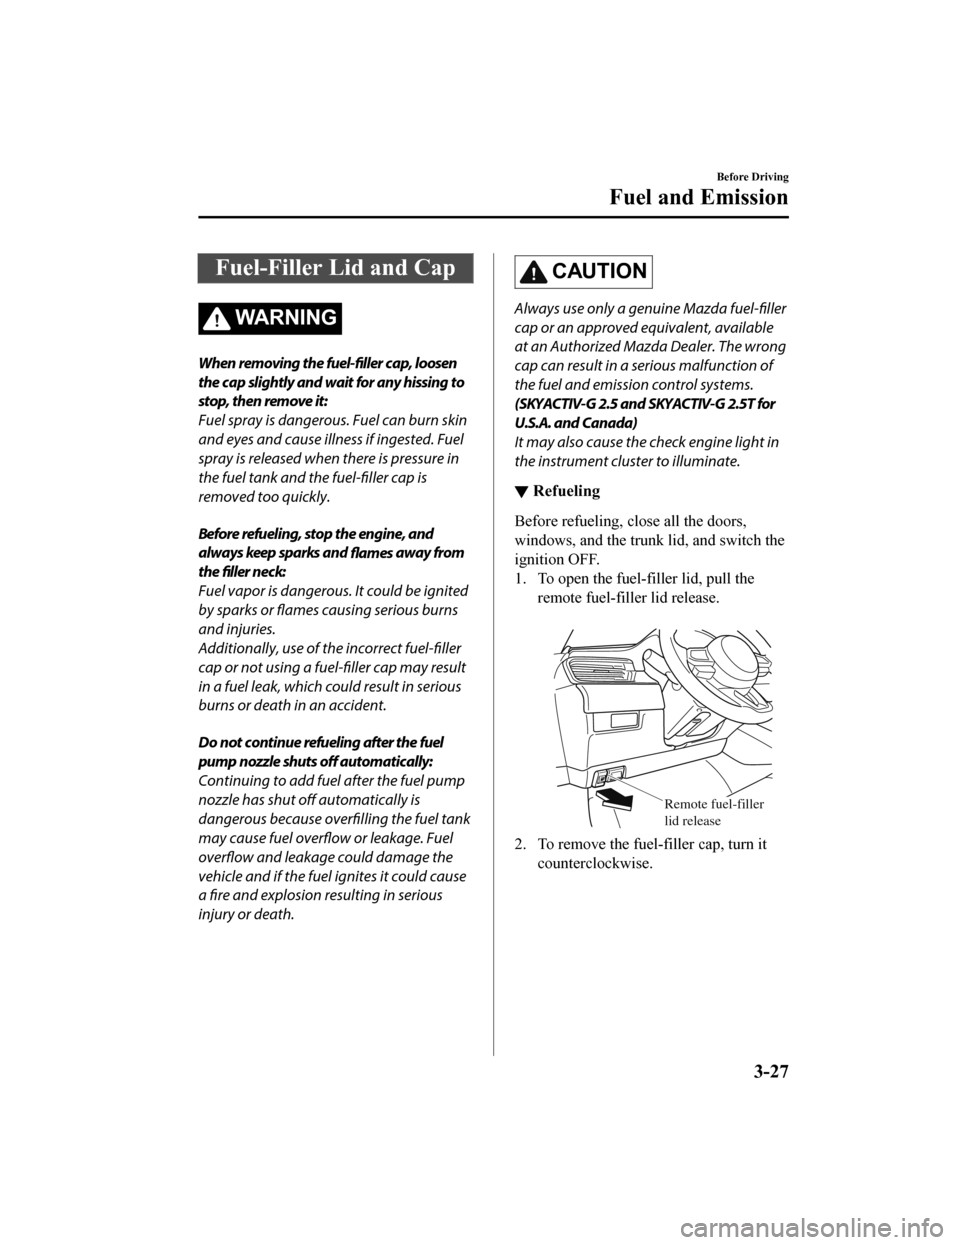 MAZDA MODEL 6 2020  Owners Manual (in English) Fuel-Filler Lid and Cap
WA R N I N G
When removing the fuel-filler cap, loosen
the cap slightly and wait for any hissing to
stop, then remove it:
Fuel spray is dangerous. Fuel can burn skin
and eyes a